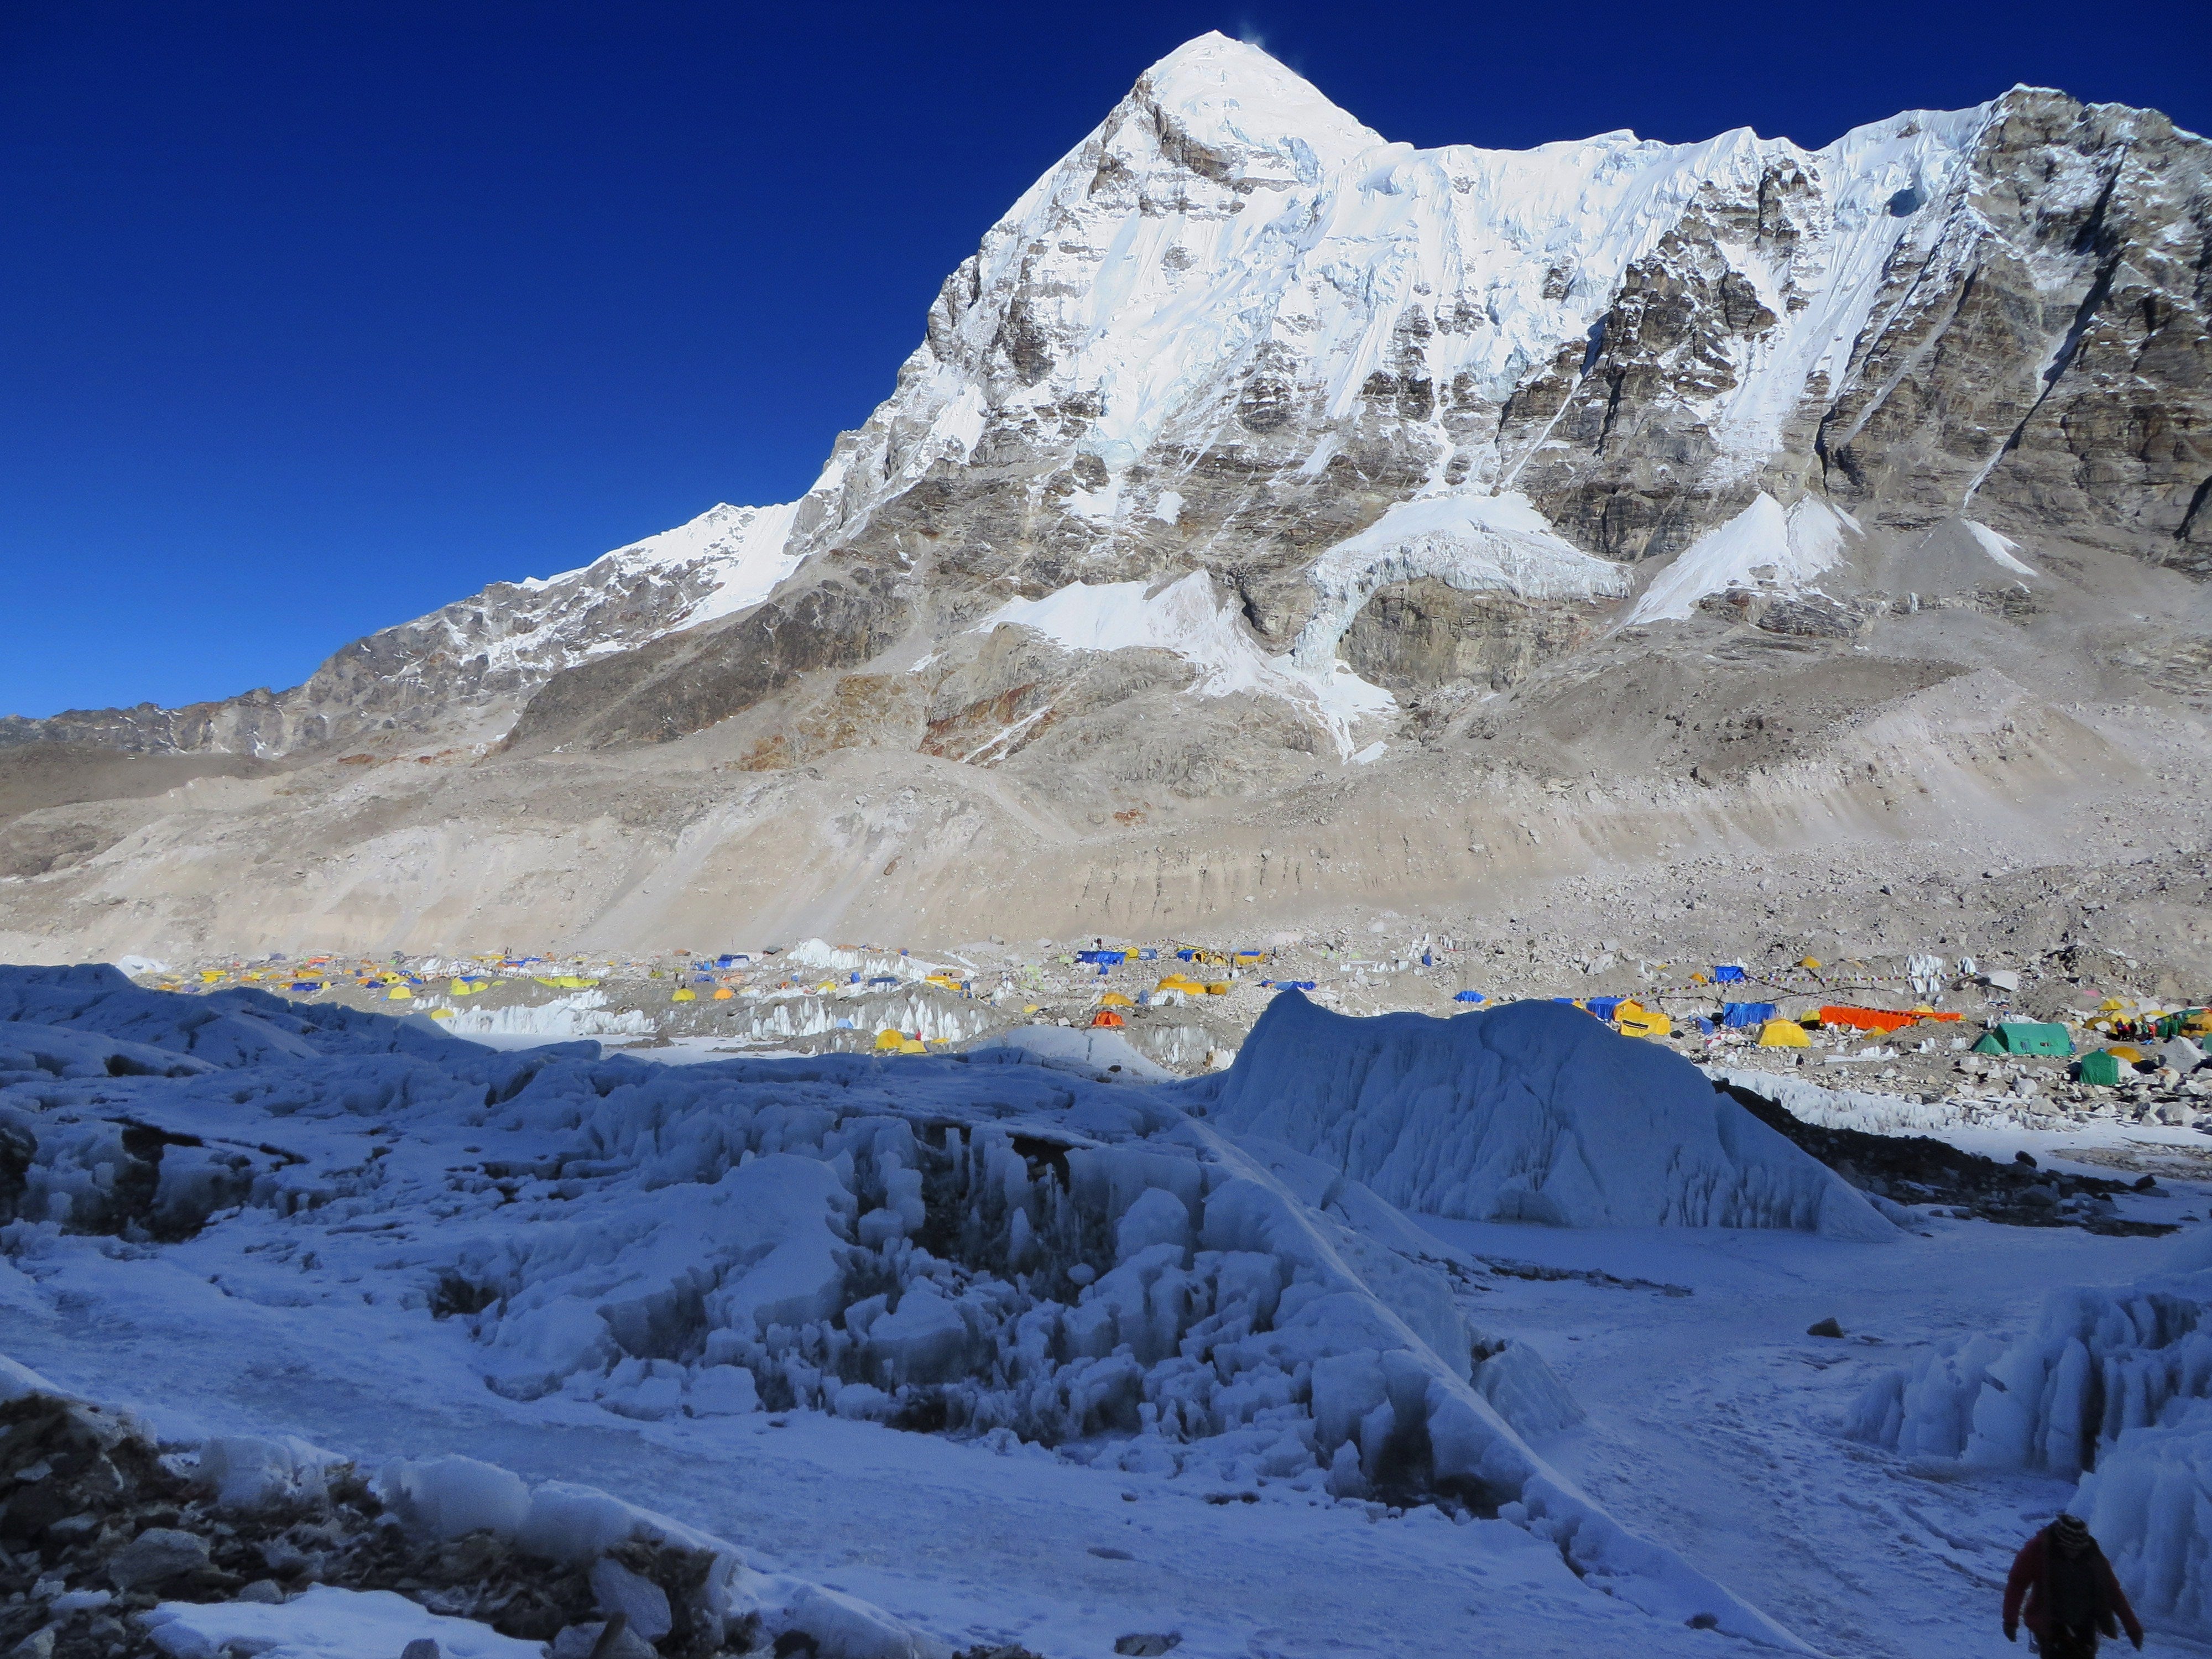 Everest Base Camp is seen from Crampon Point, the entrance to the Khumbu icefall below the mountain